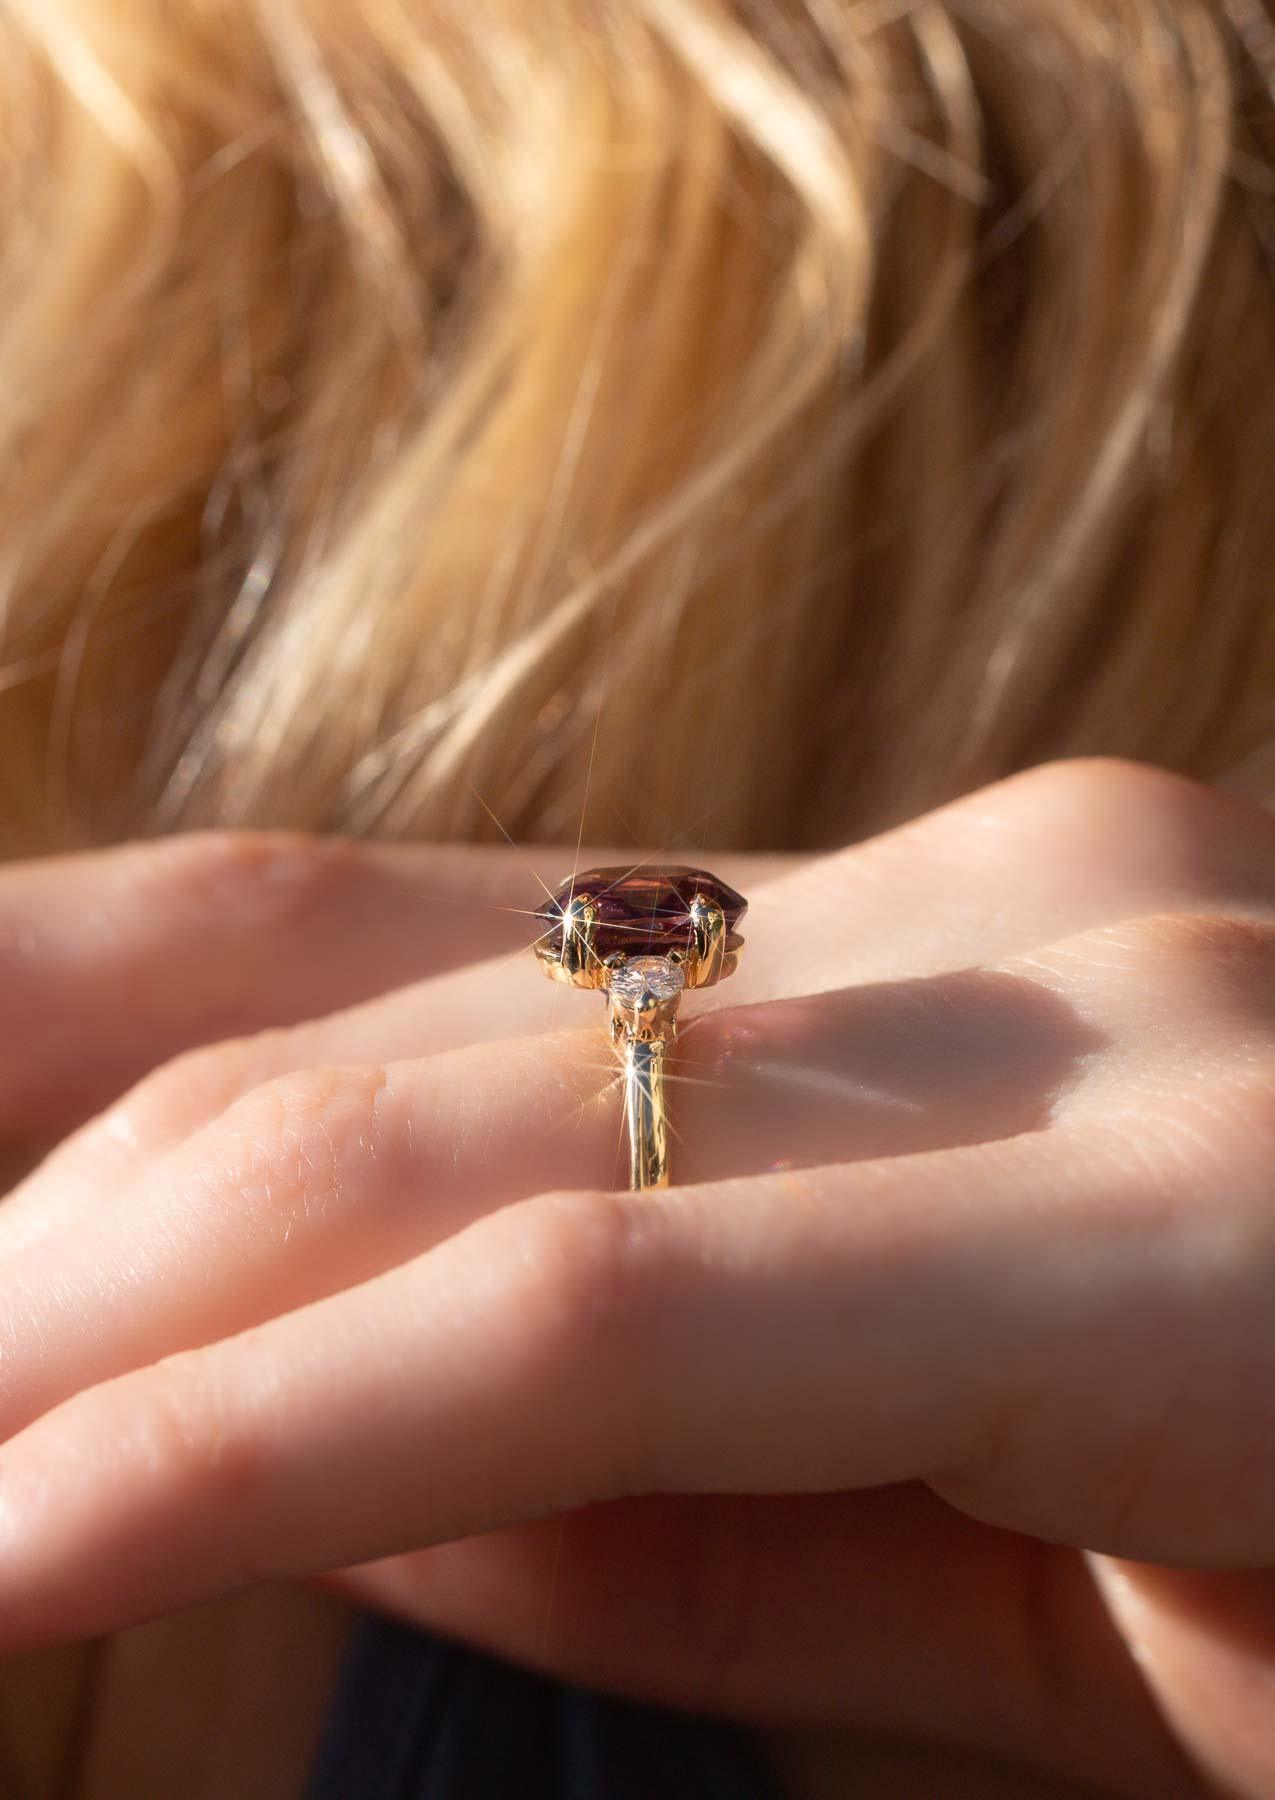 The Ada 4.5ct Plum Spinel Ring - Molten Store